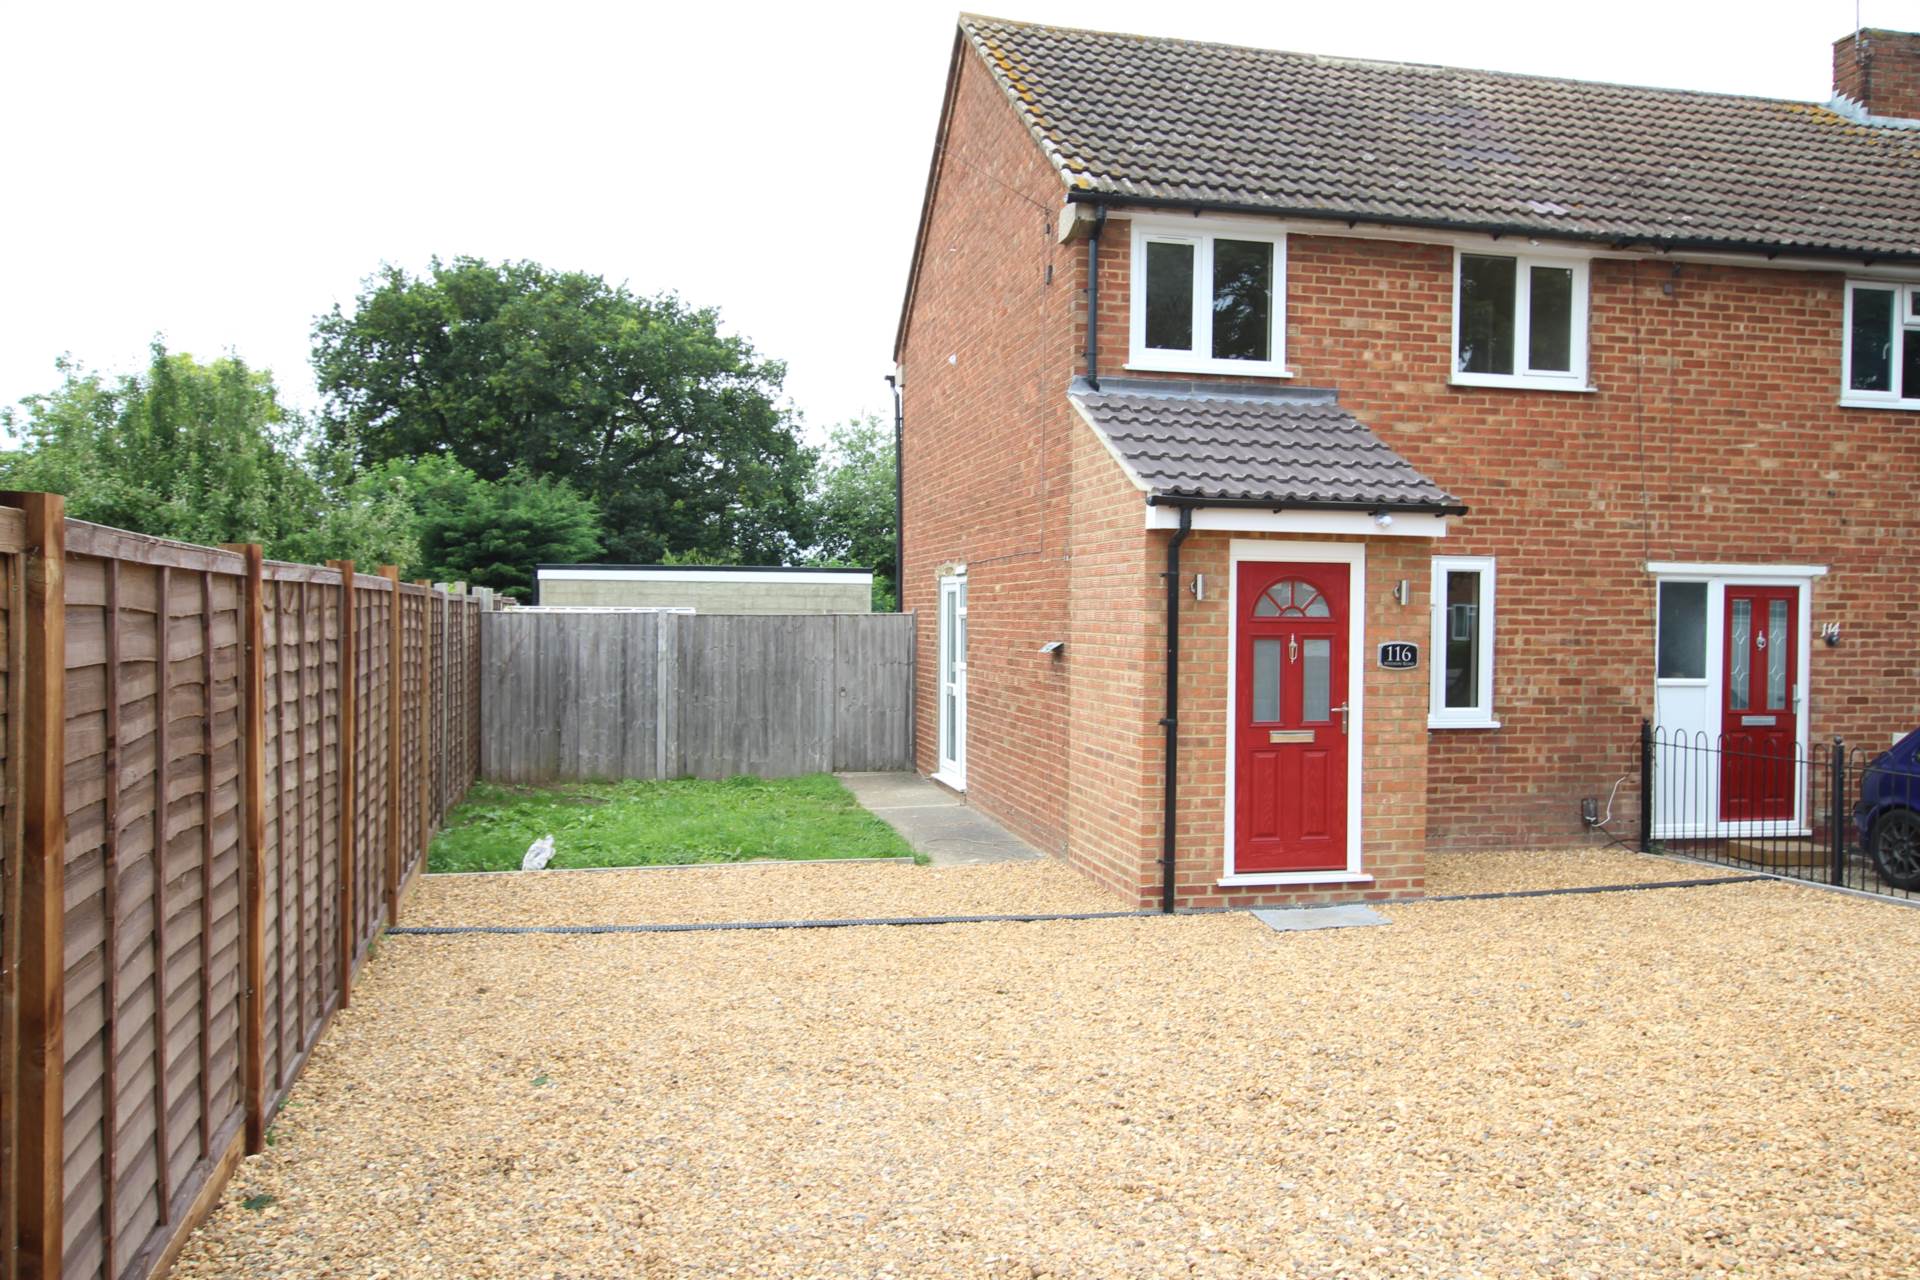 3 bed End Terraced House for rent in Aylesbury. From Mortimers